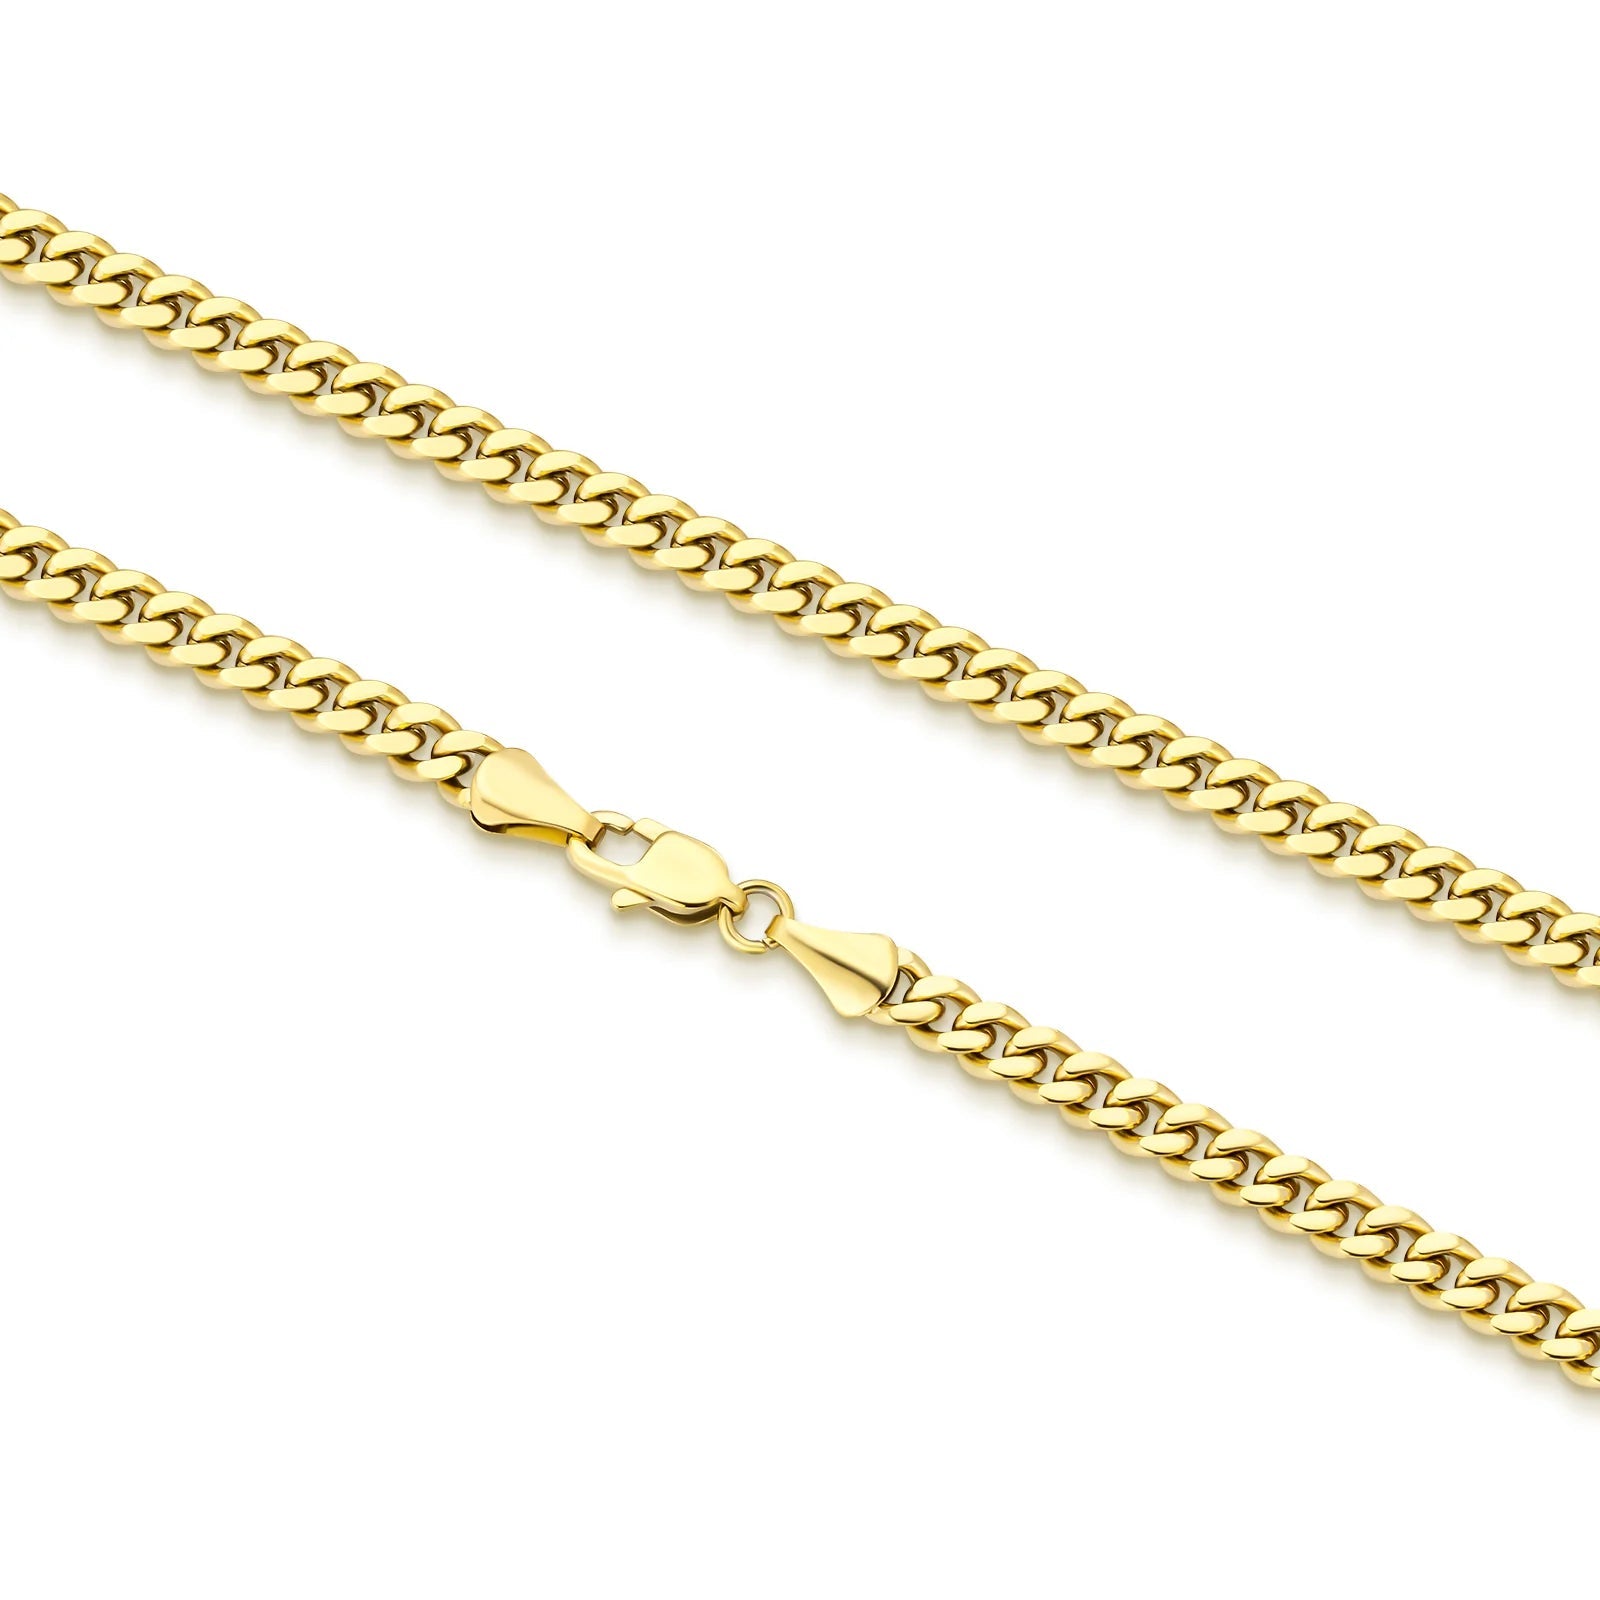 5mm Miami Cuban Link Chain in 14K Gold Necklaces 